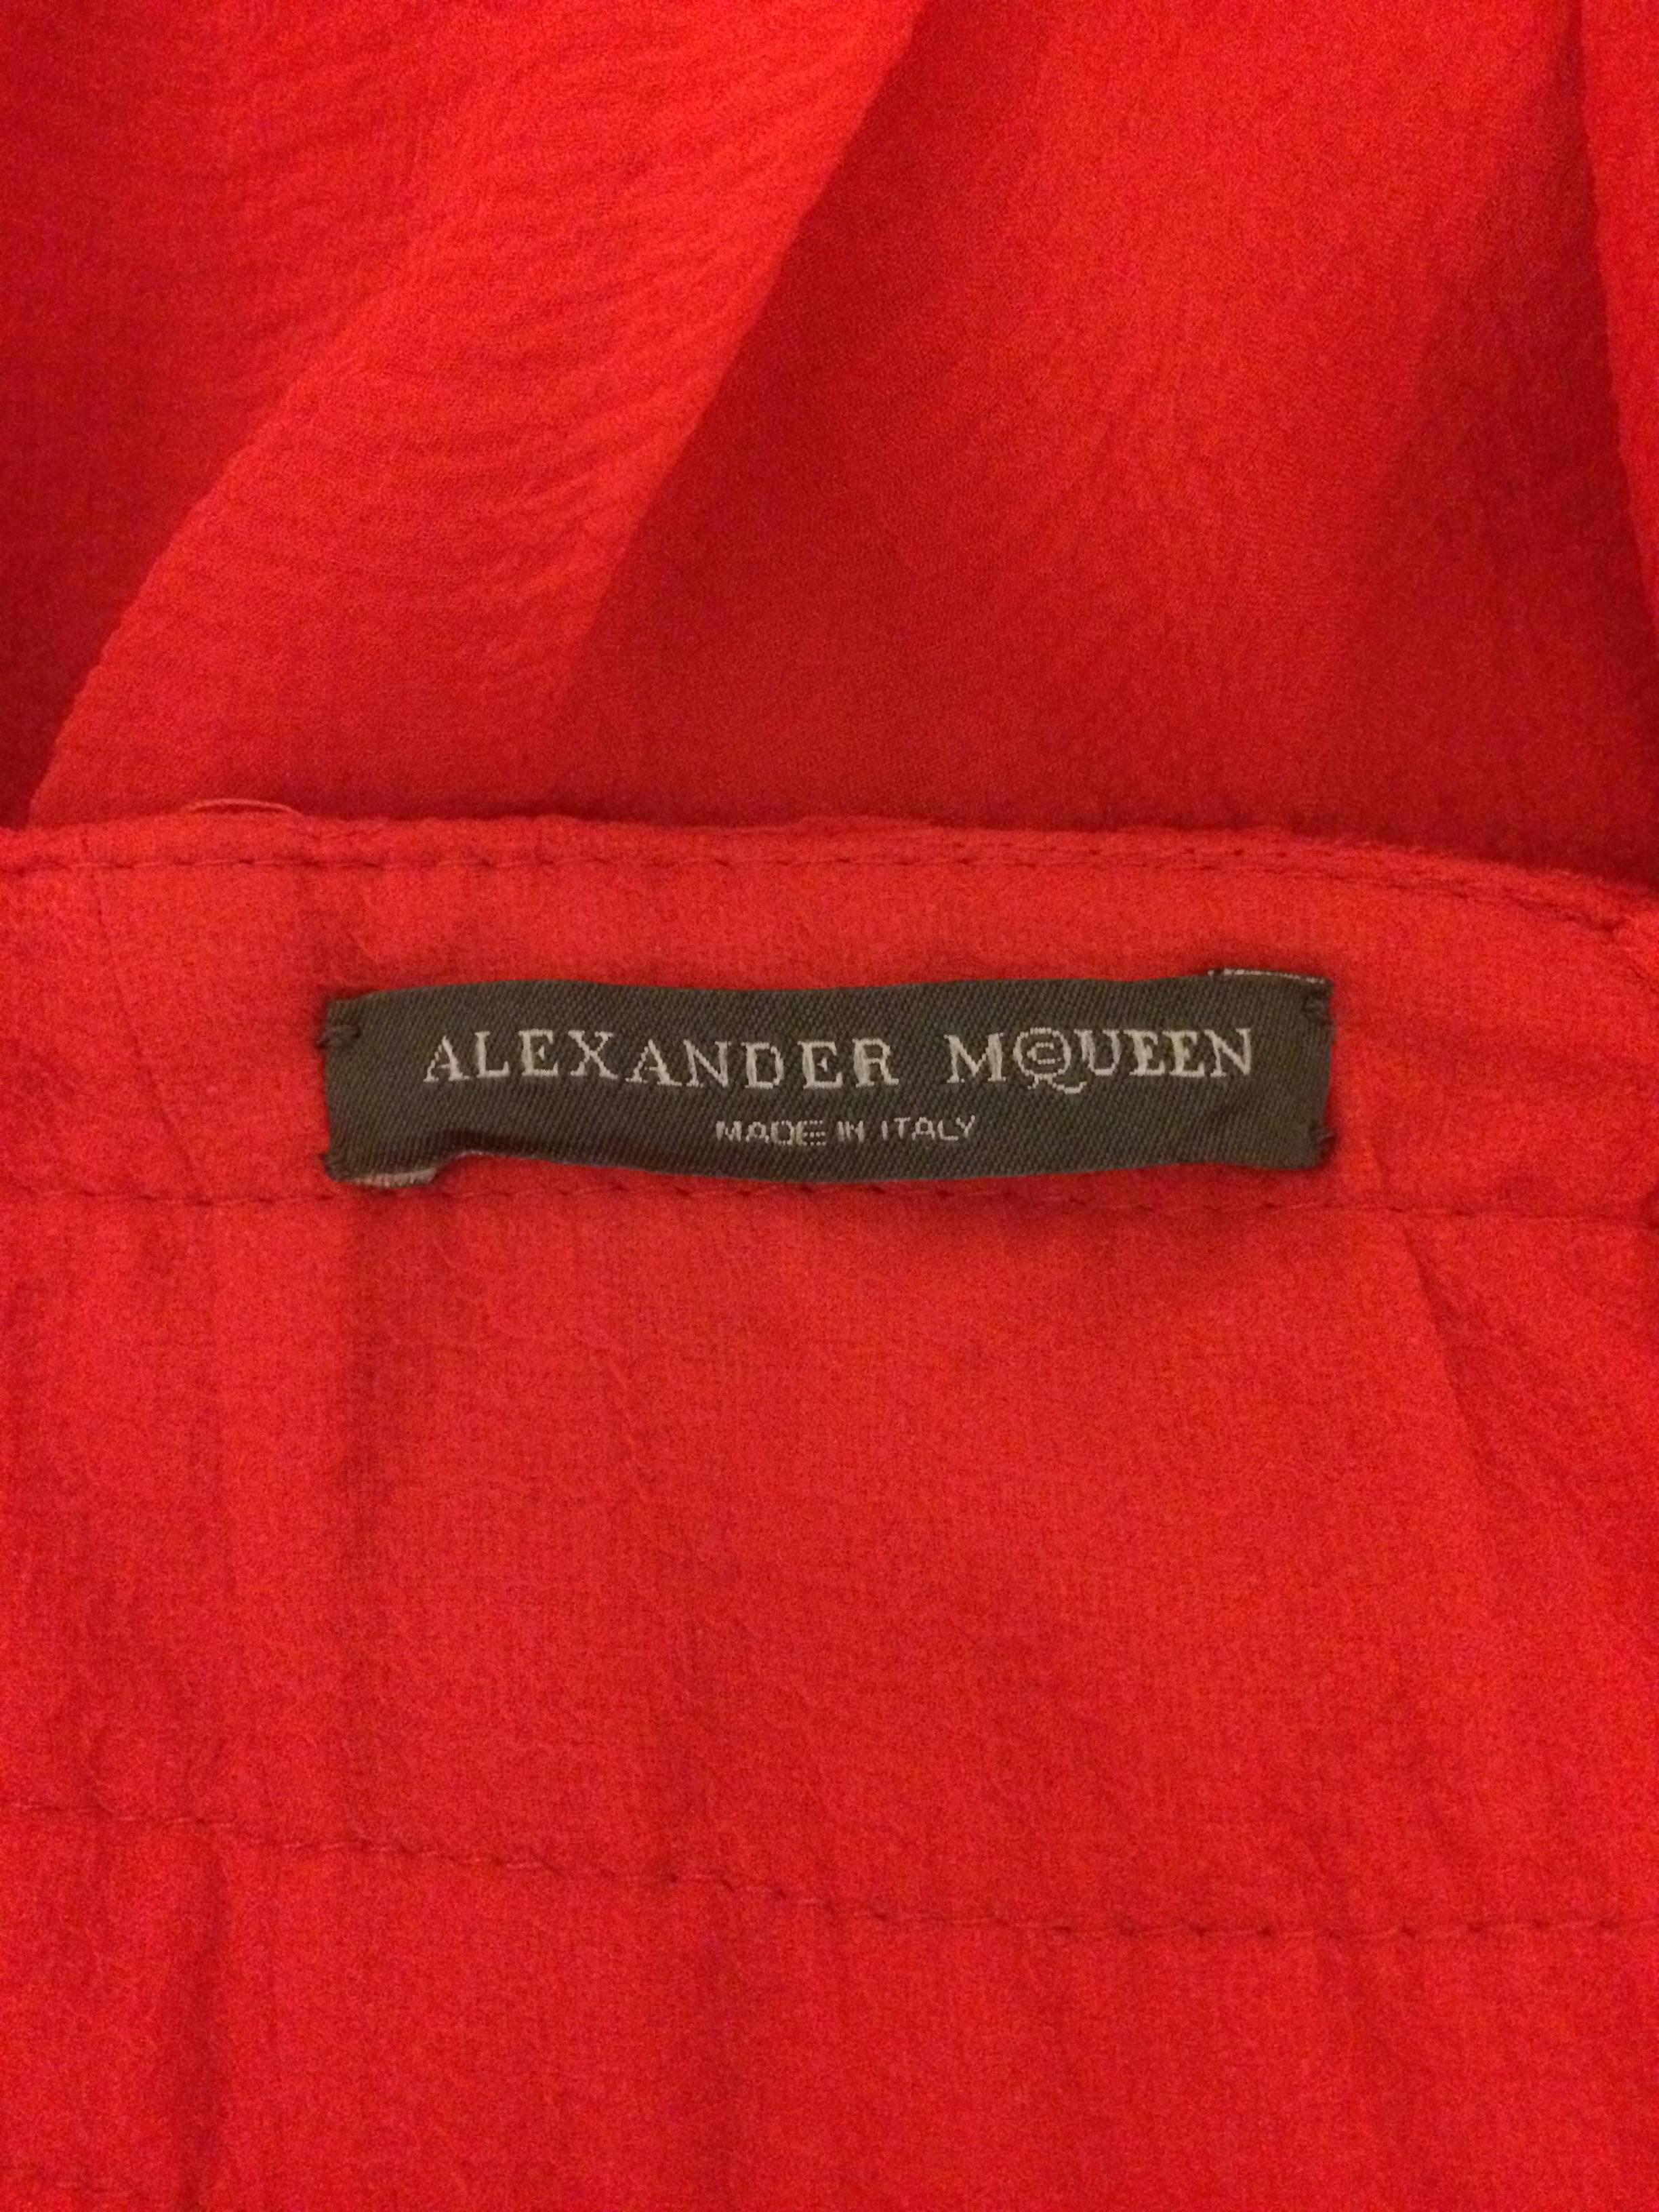 Alexander McQueen Flowing Red Strap Skirt from Spring 2002 Irere Collection In Good Condition In San Francisco, CA